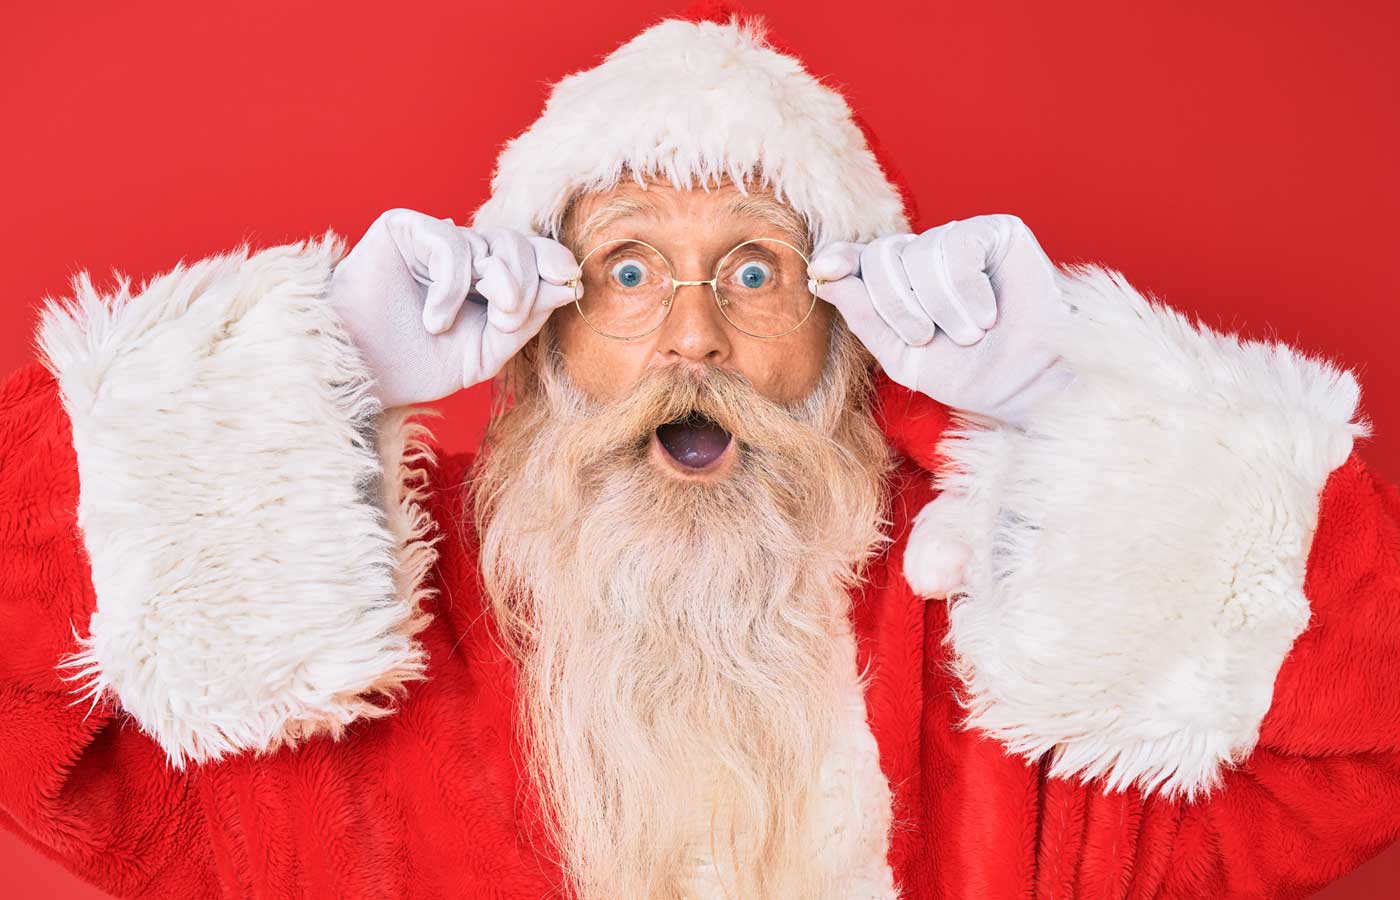 image of Santa Claus pulling a face in front of a red background